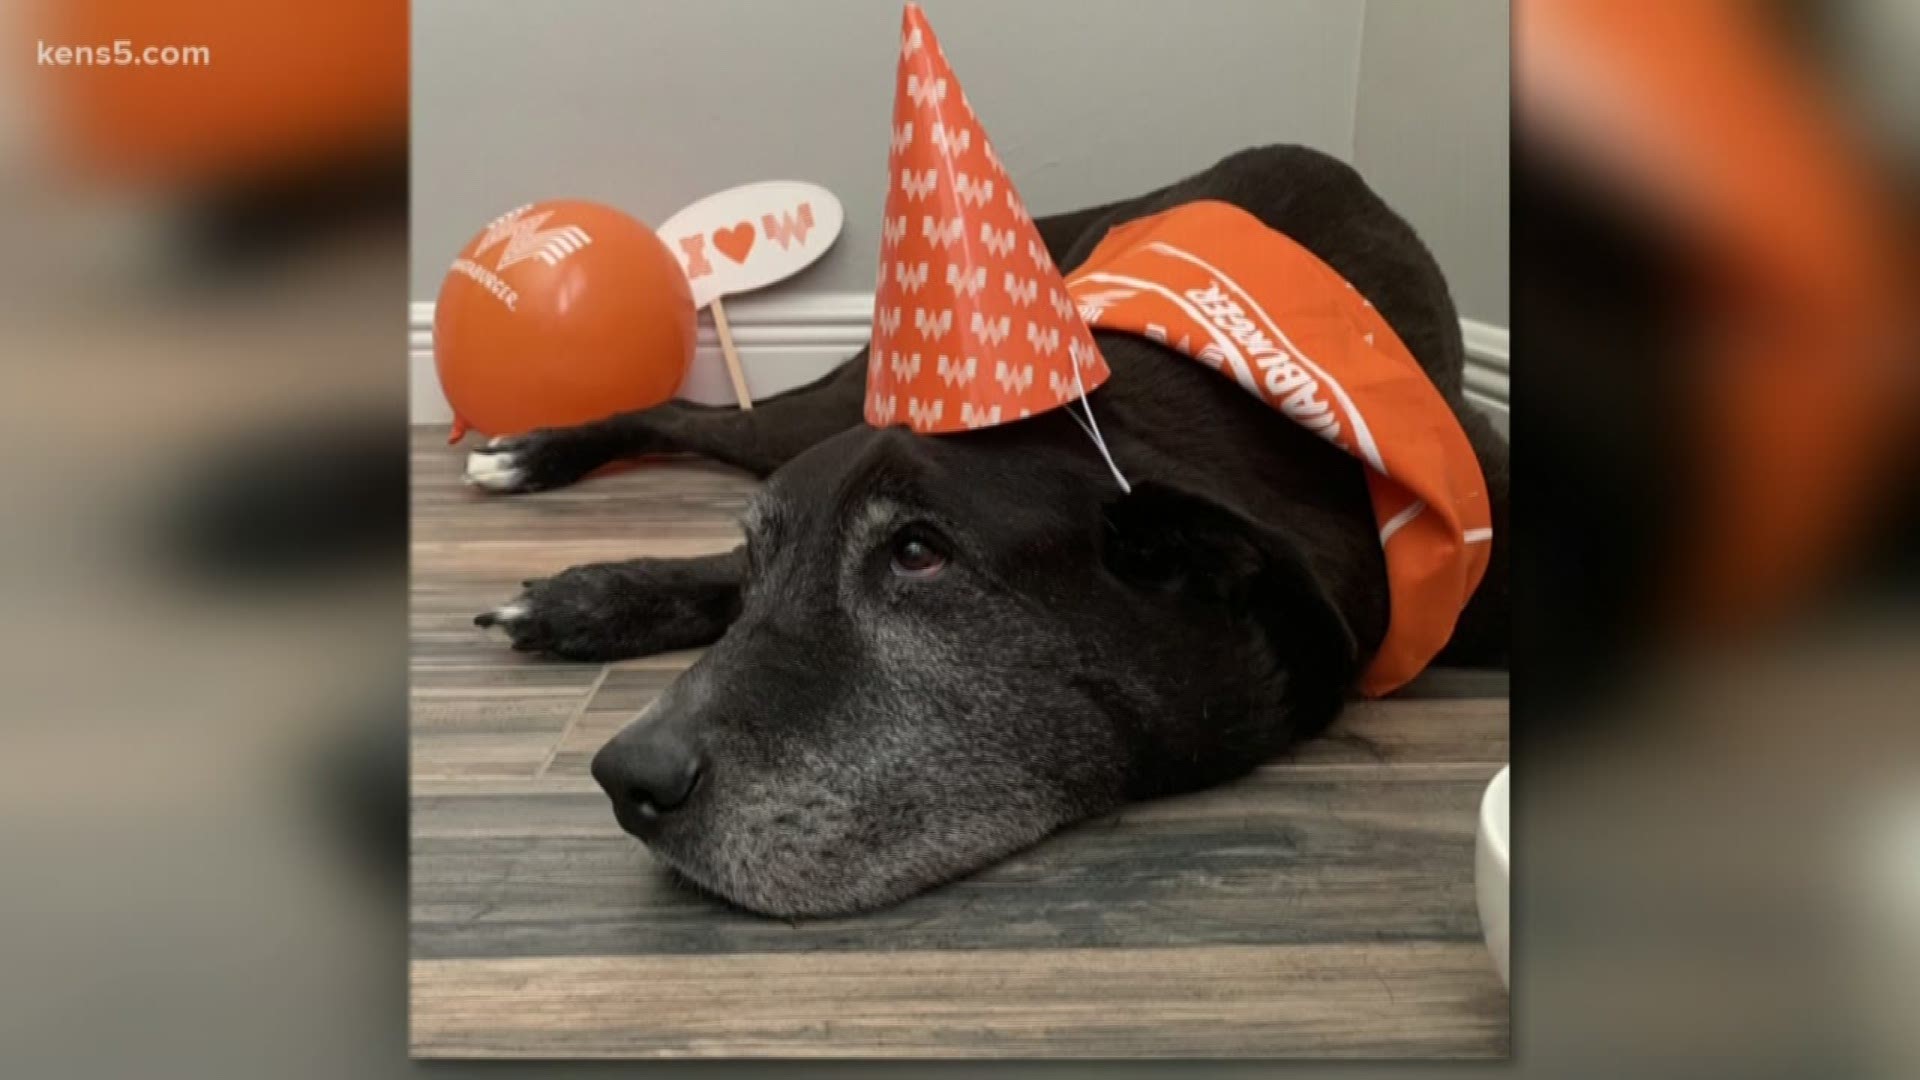 Stitch the four-legged customer loved the Whataburger Jr. plain and dry with cheese, so it only made sense to have the last few days of his life surrounded by his loved ones…and burgers.